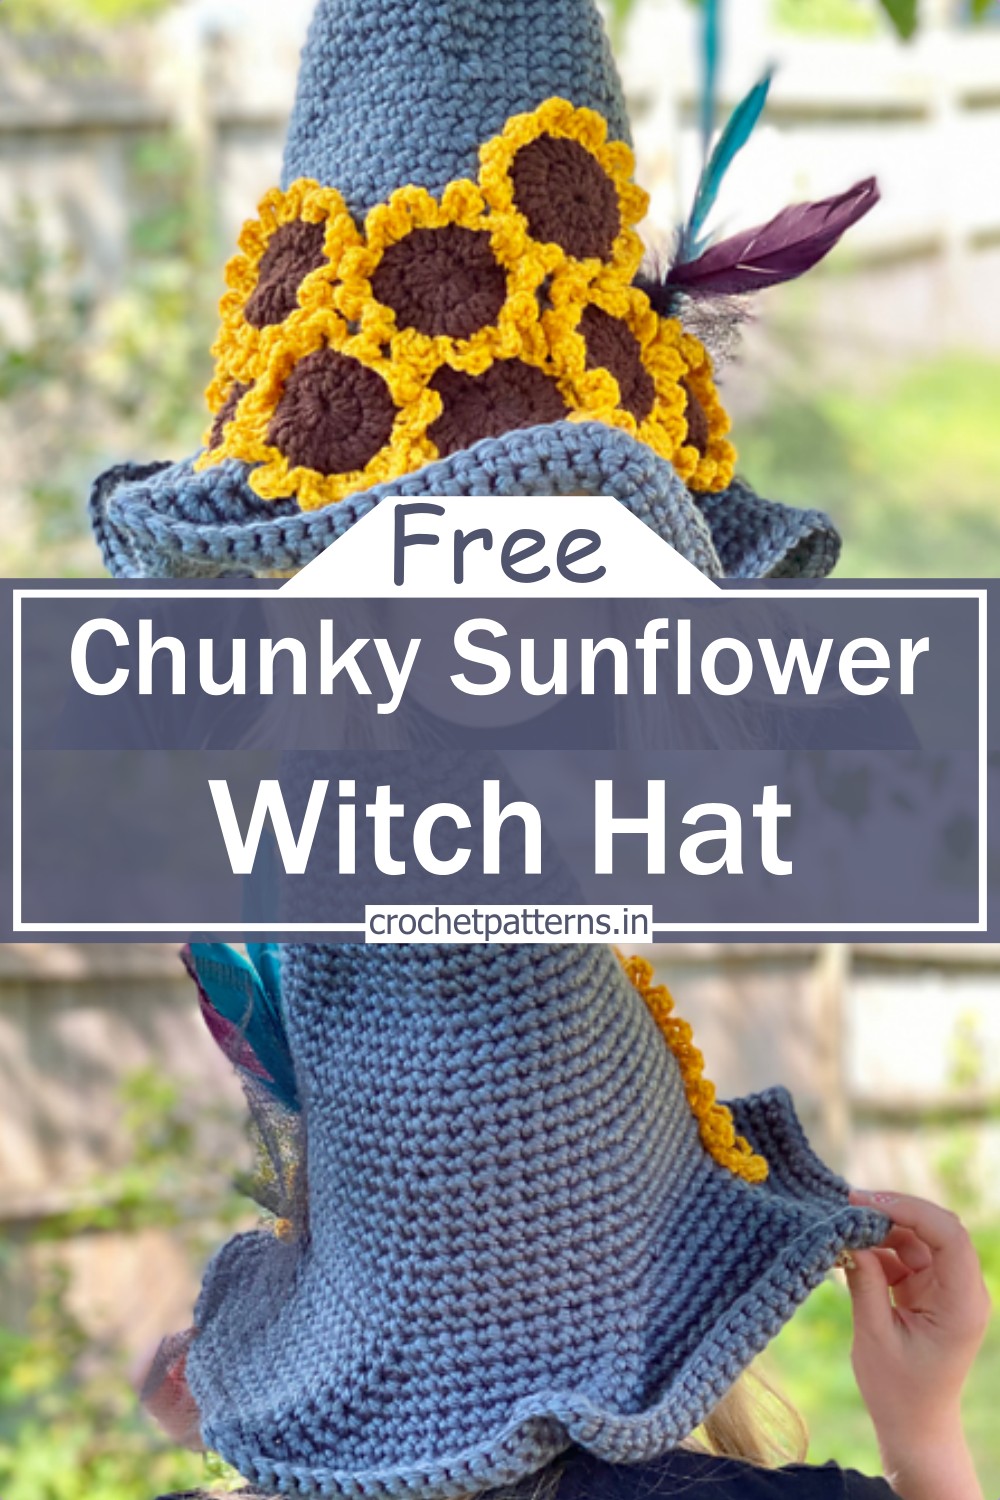 Chunky Sunflower Witch Hat